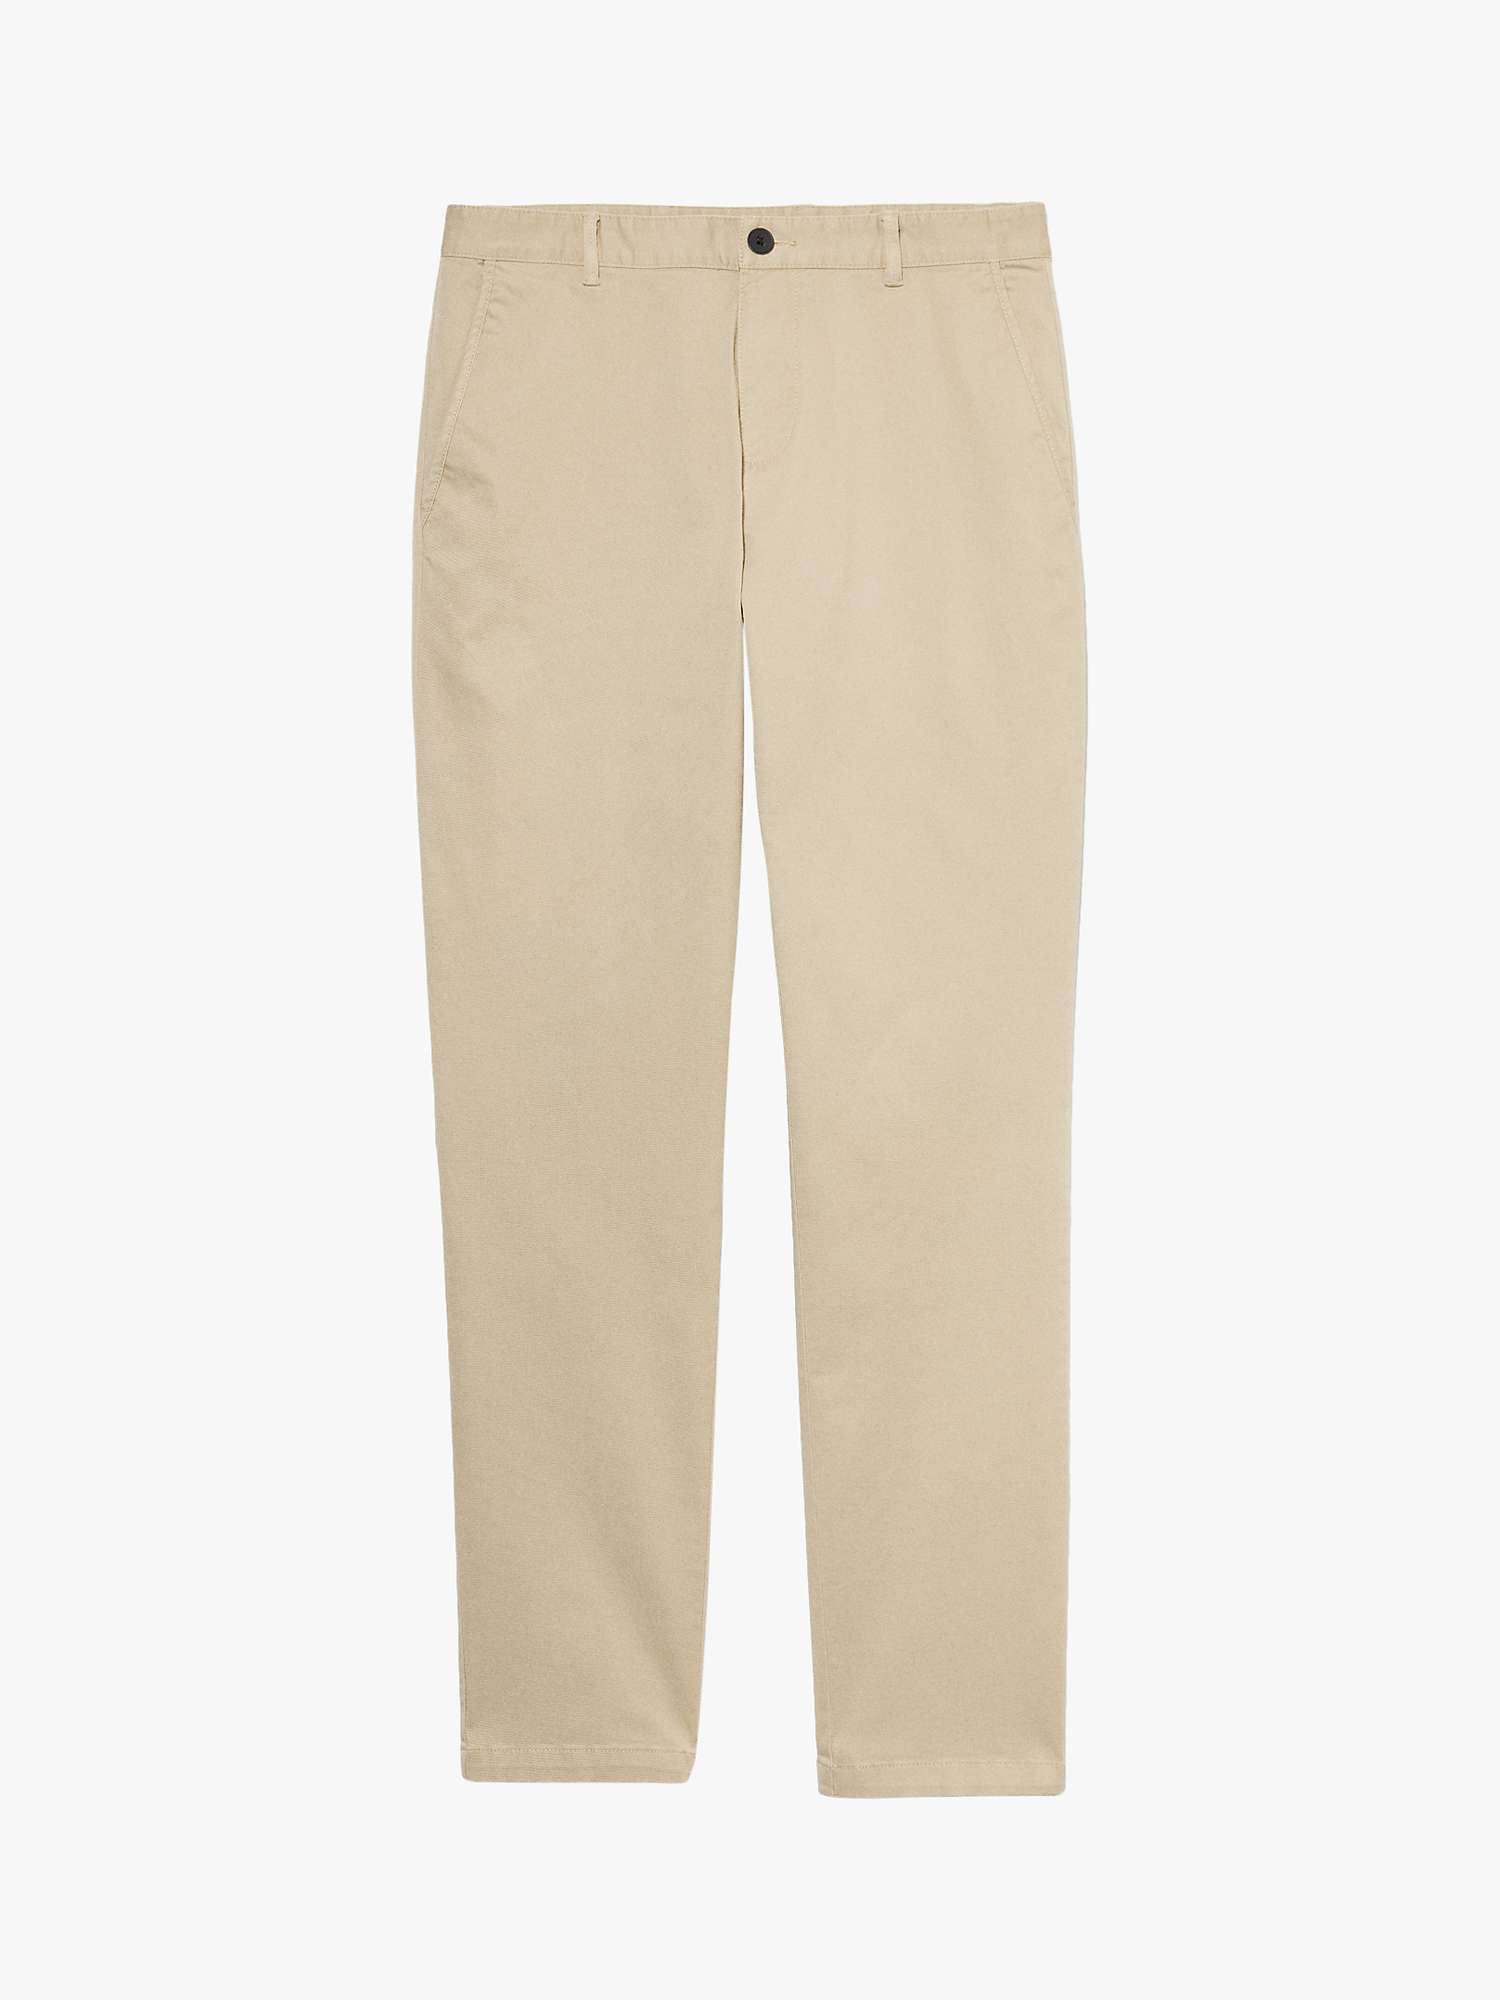 Buy SISLEY Stretch Cotton Drill Chino Trousers, Brown Online at johnlewis.com